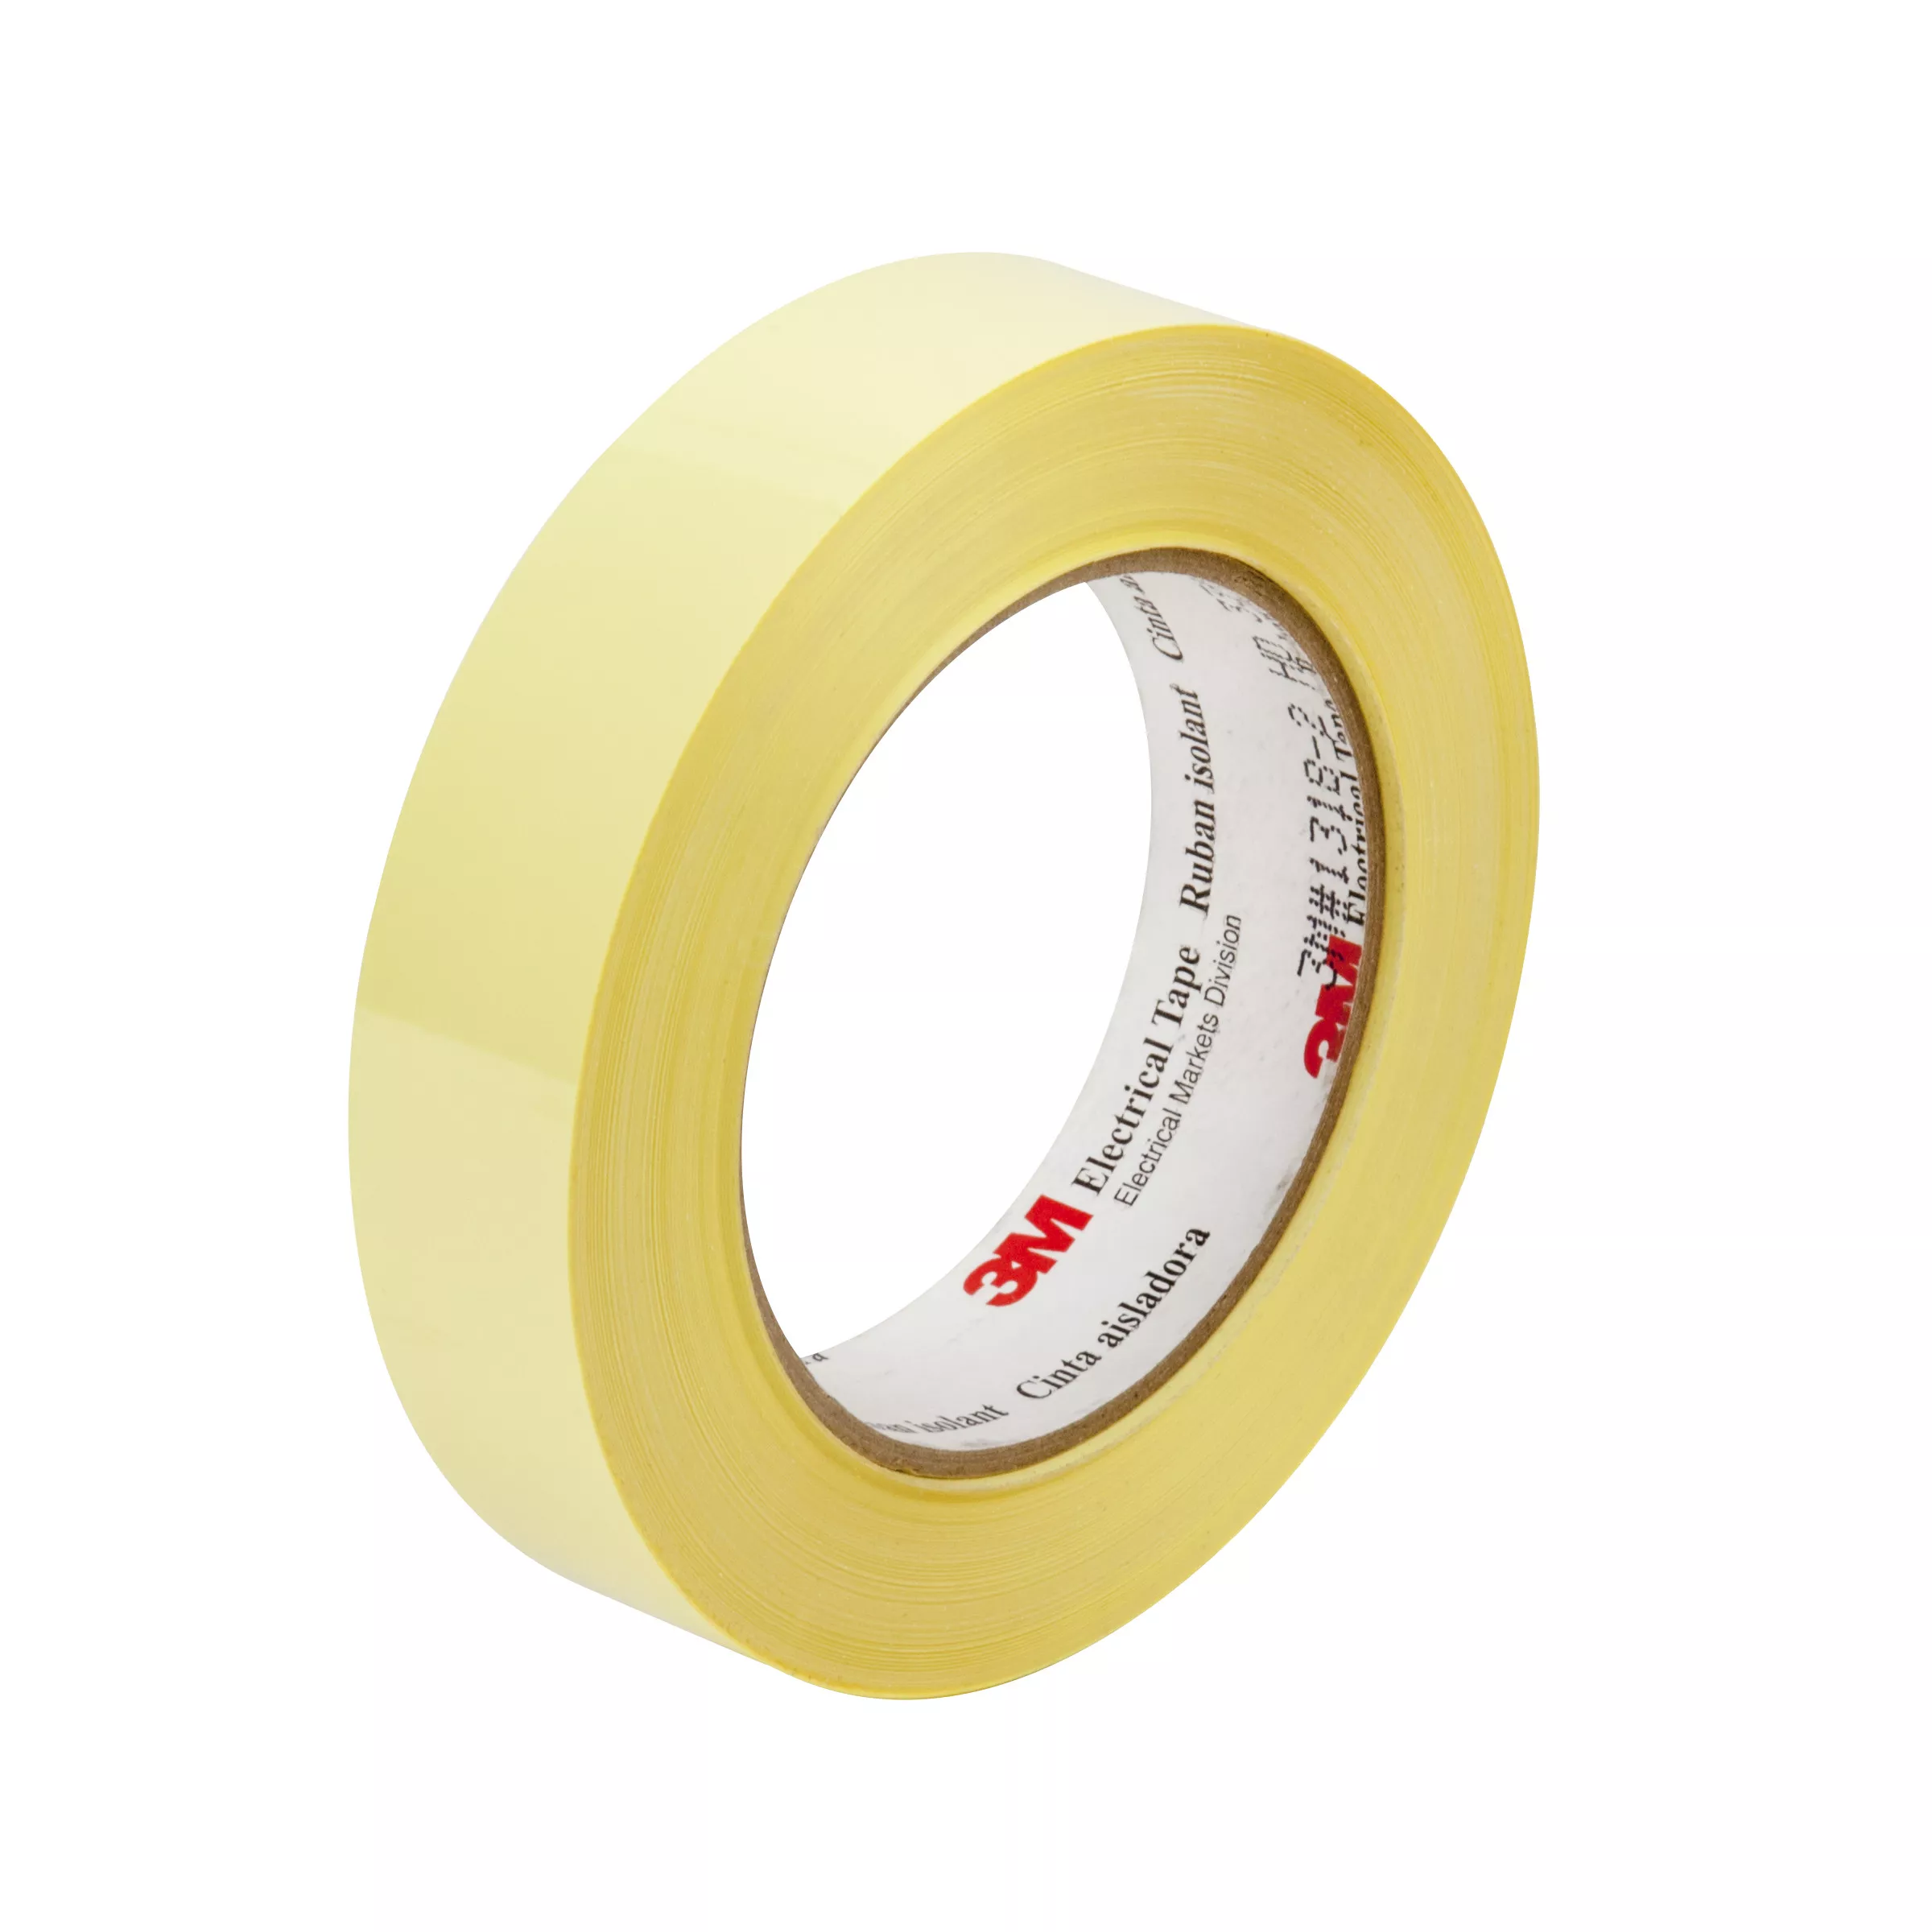 SKU 7010397214 | 3M™ Polyester Film Electrical Tape 1350F-1